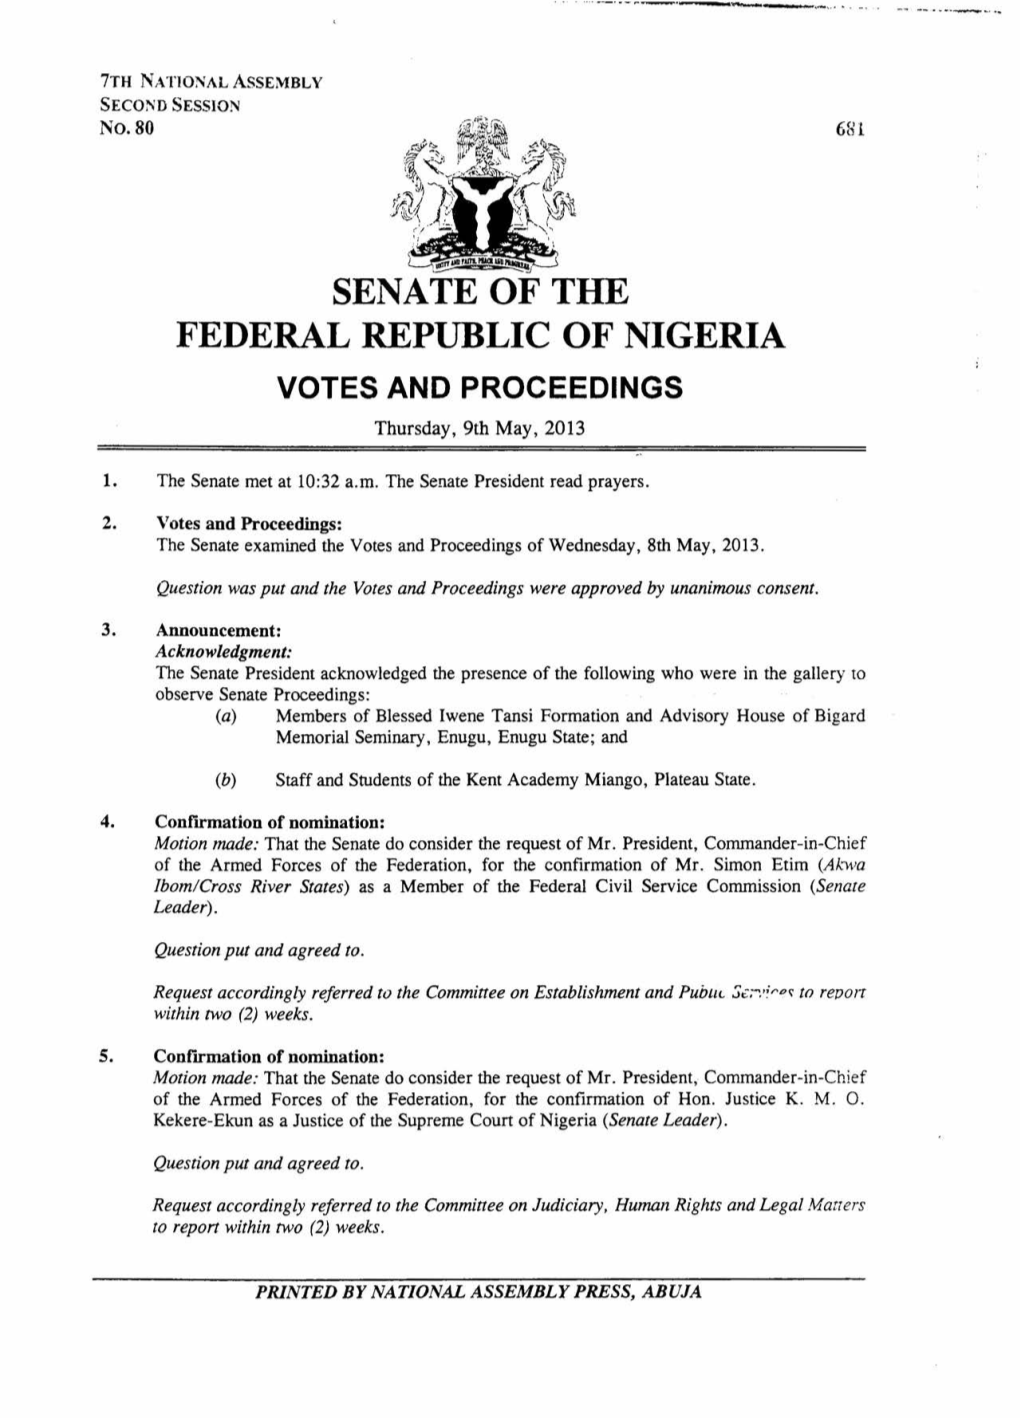 SENATE of the FEDERAL REPUBLIC of NIGERIA VOTES and PROCEEDINGS Thursday, 9Th May, 2013